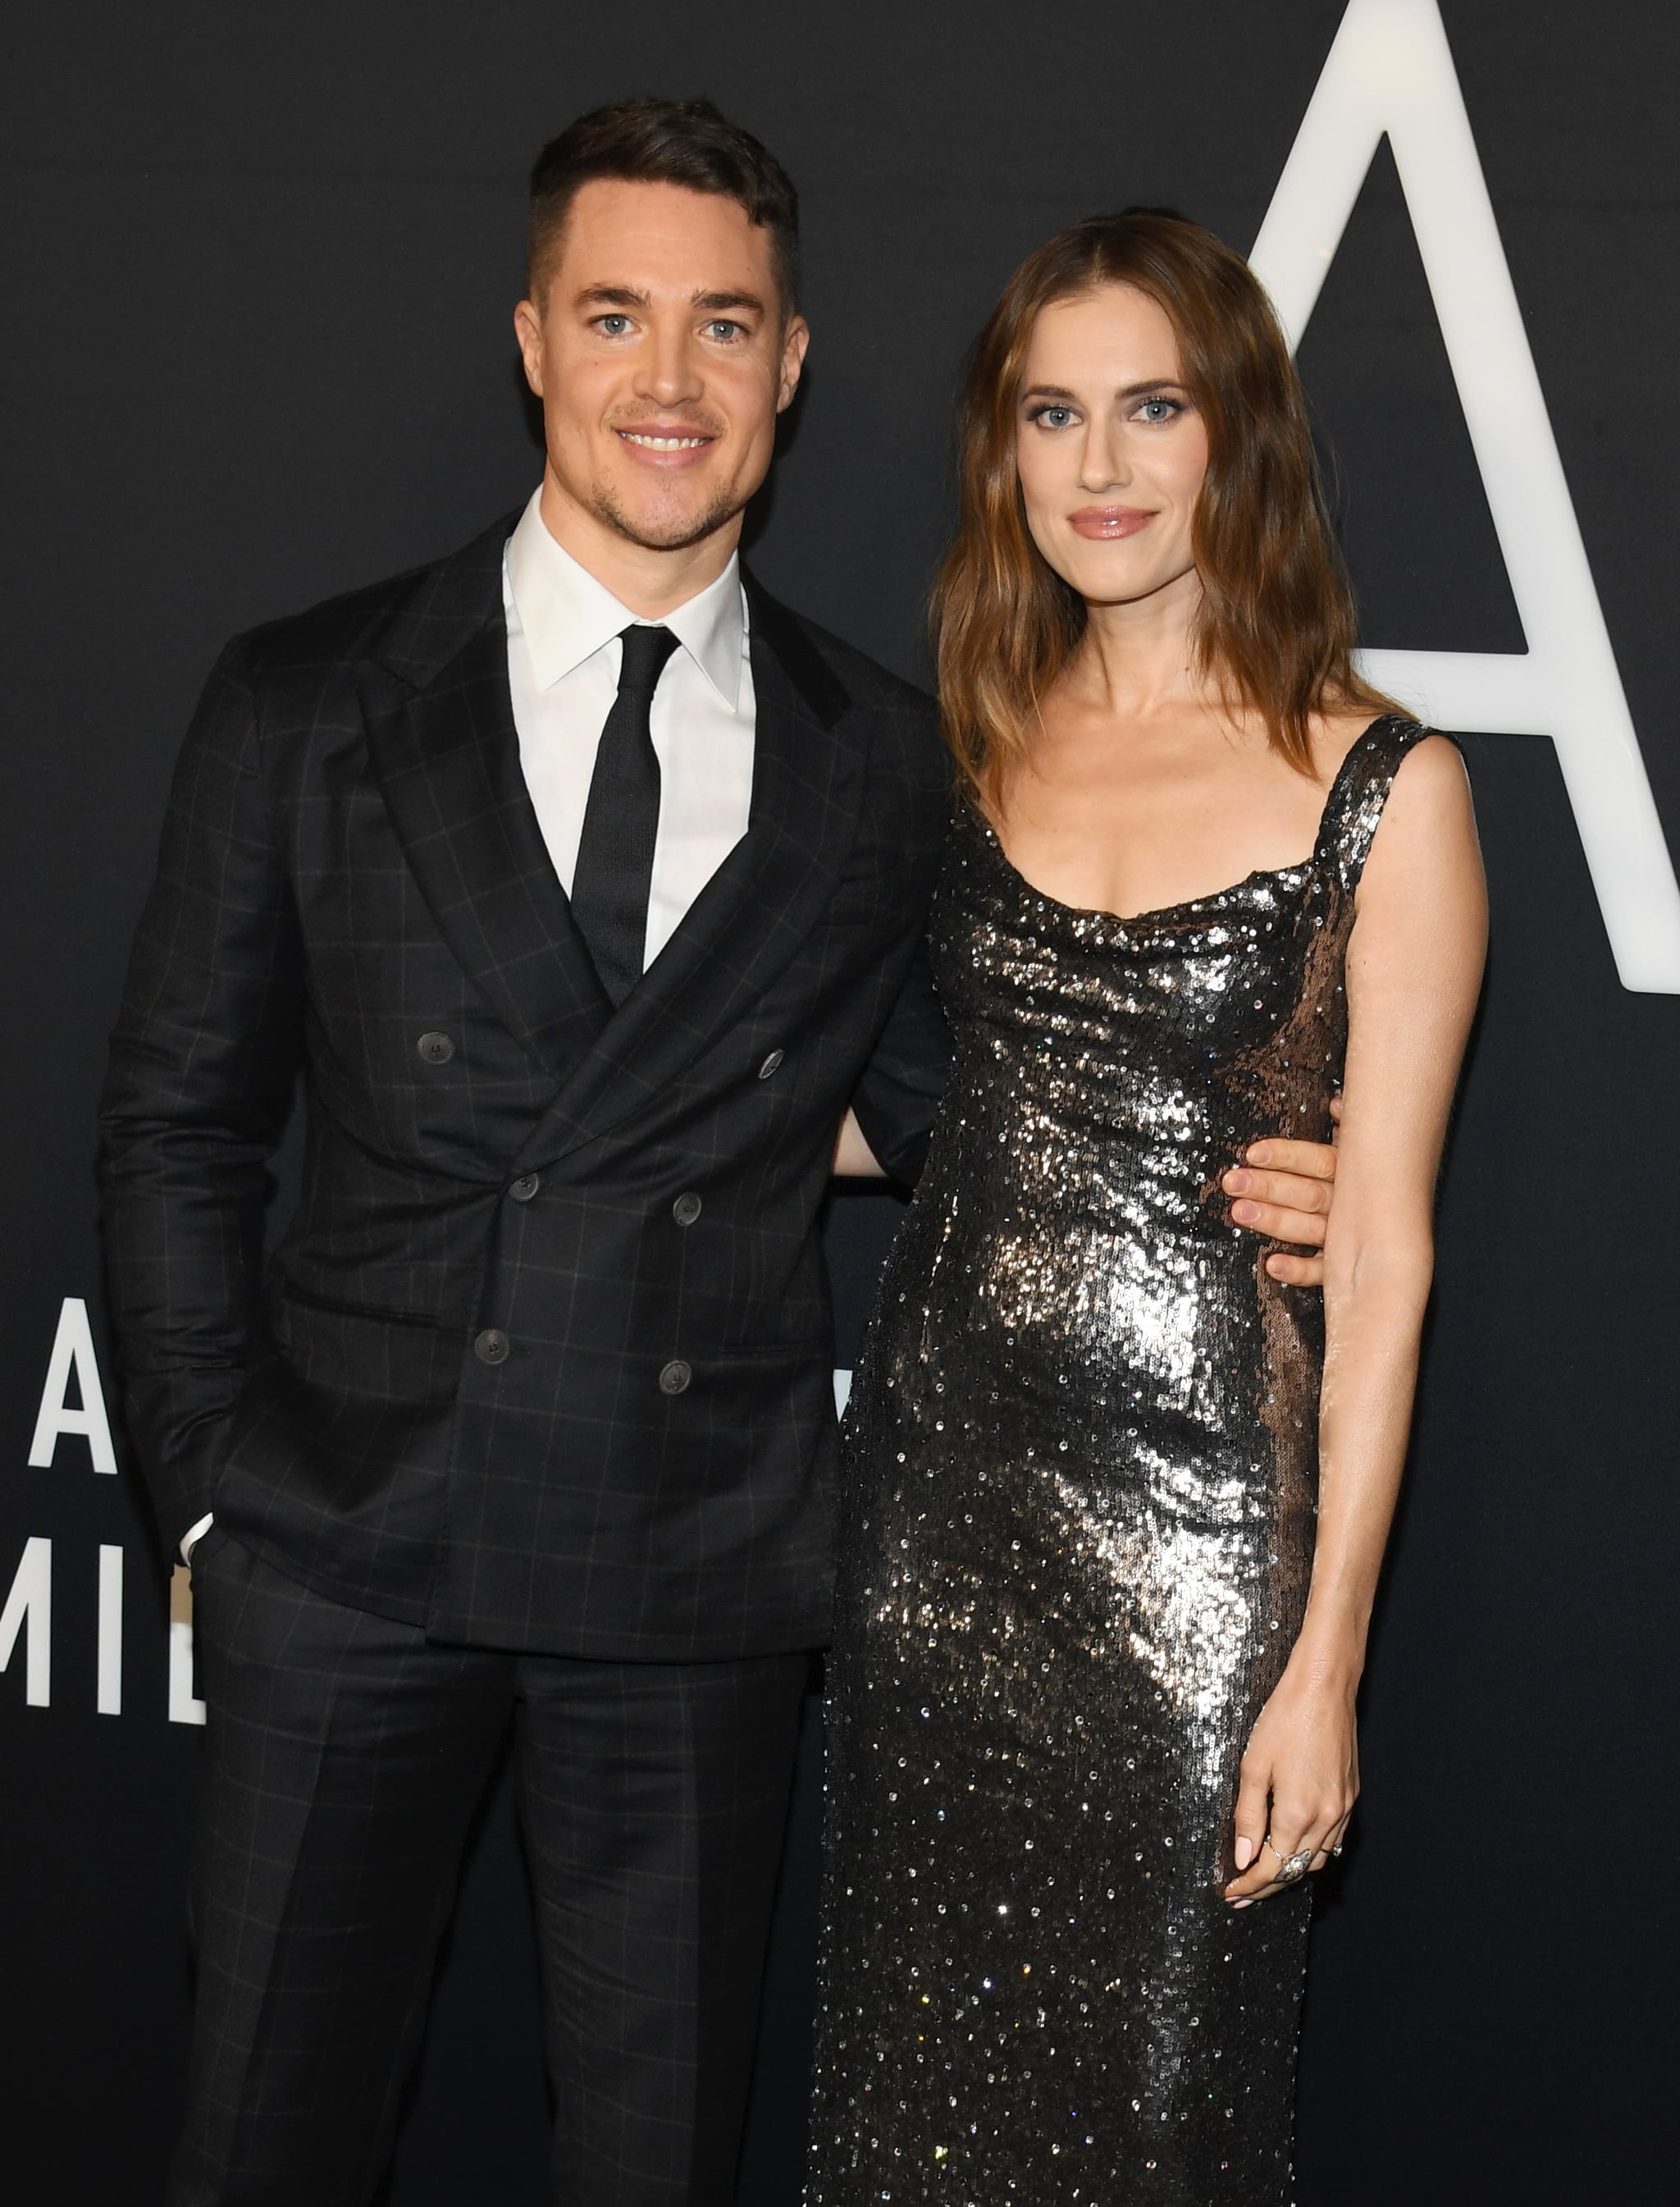 HOLLYWOOD, CALIFORNIA - DECEMBER 7: (LR) Alexander Dreymon and Allison Williams attend Universal Pictures' Los Angeles Premiere 